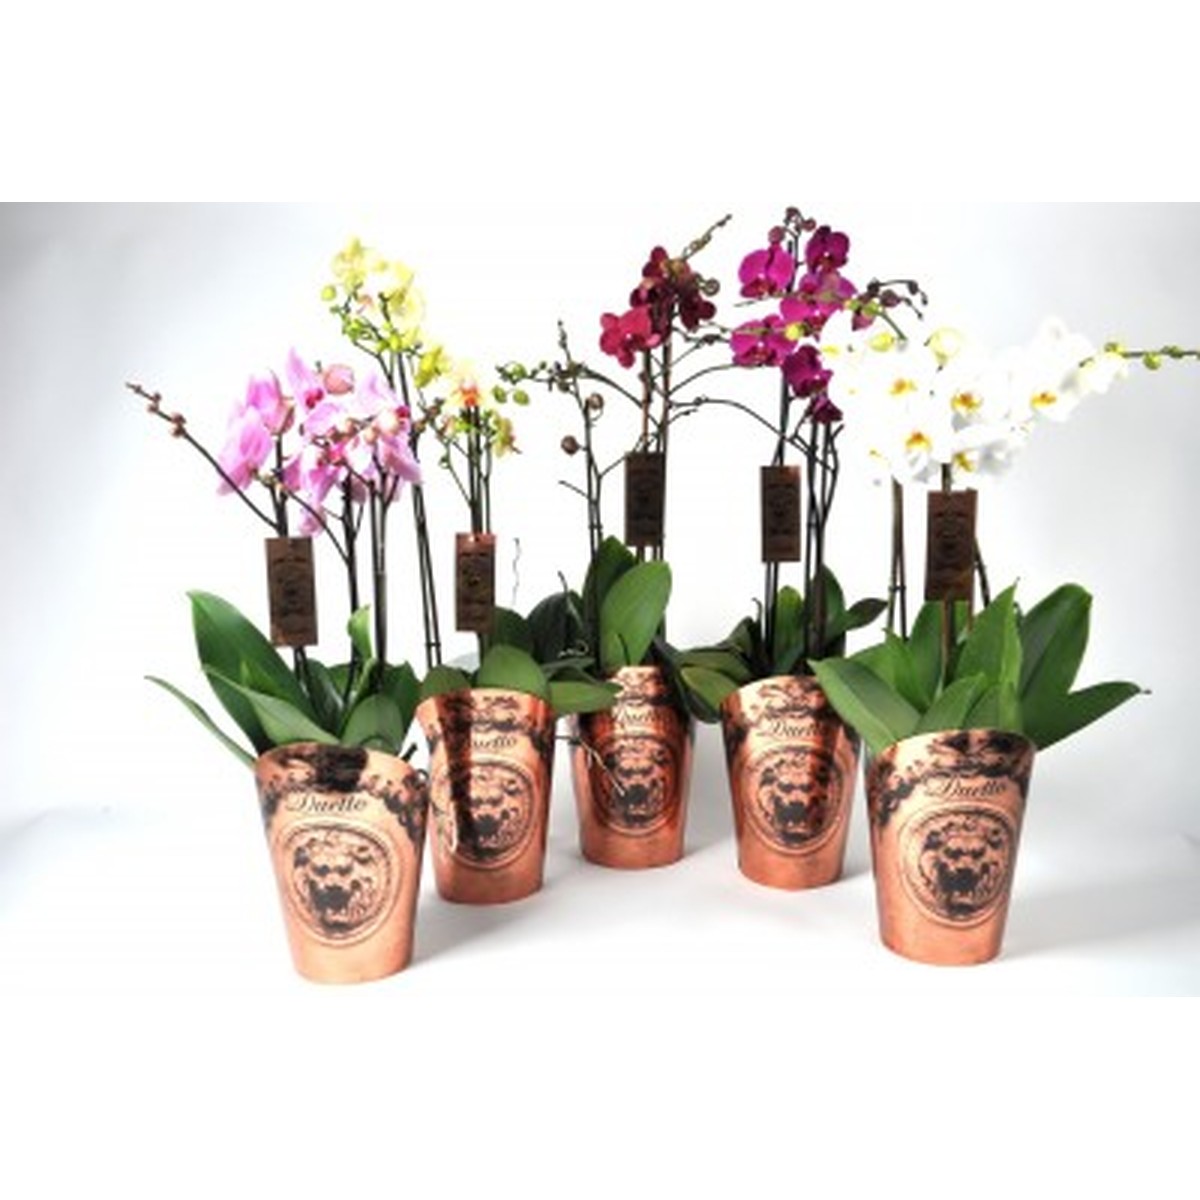   Phalaenopsis 'Duetto'  Pot 17 cm, 3-4 branches